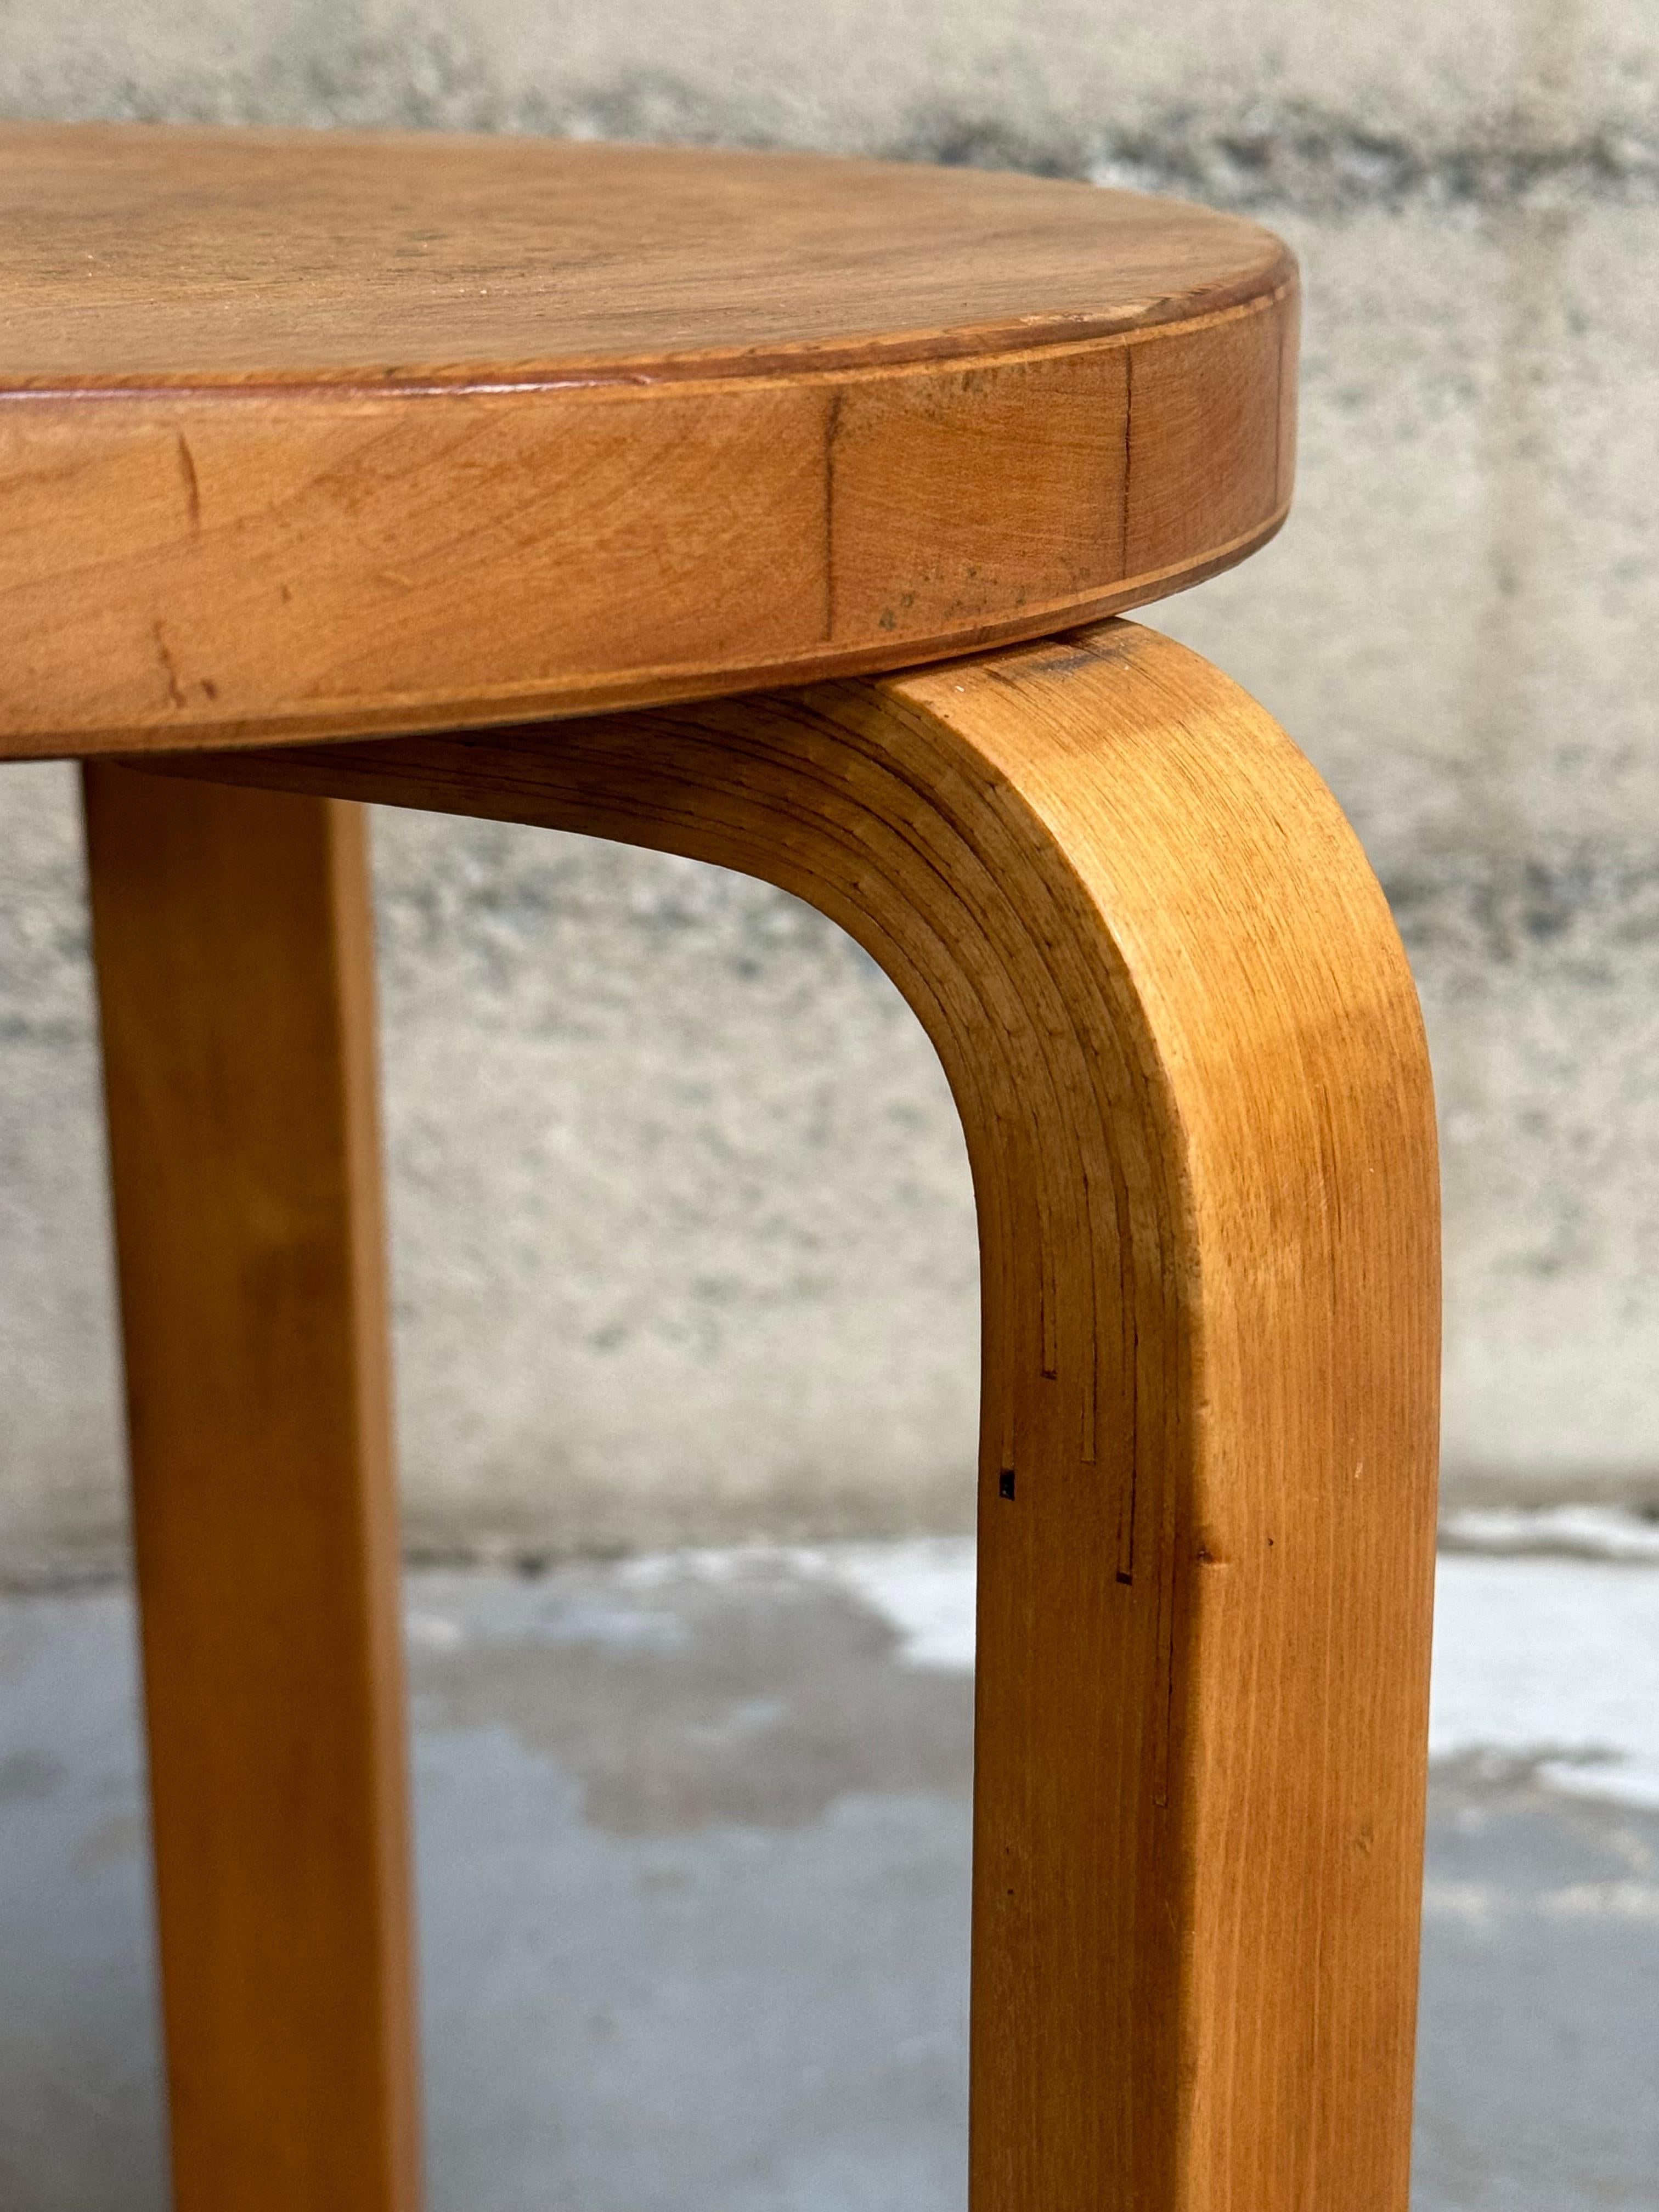 Early Production Alvar Aalto Model 60 Stool Finsven Late 1940s In Good Condition For Sale In Oakland, CA